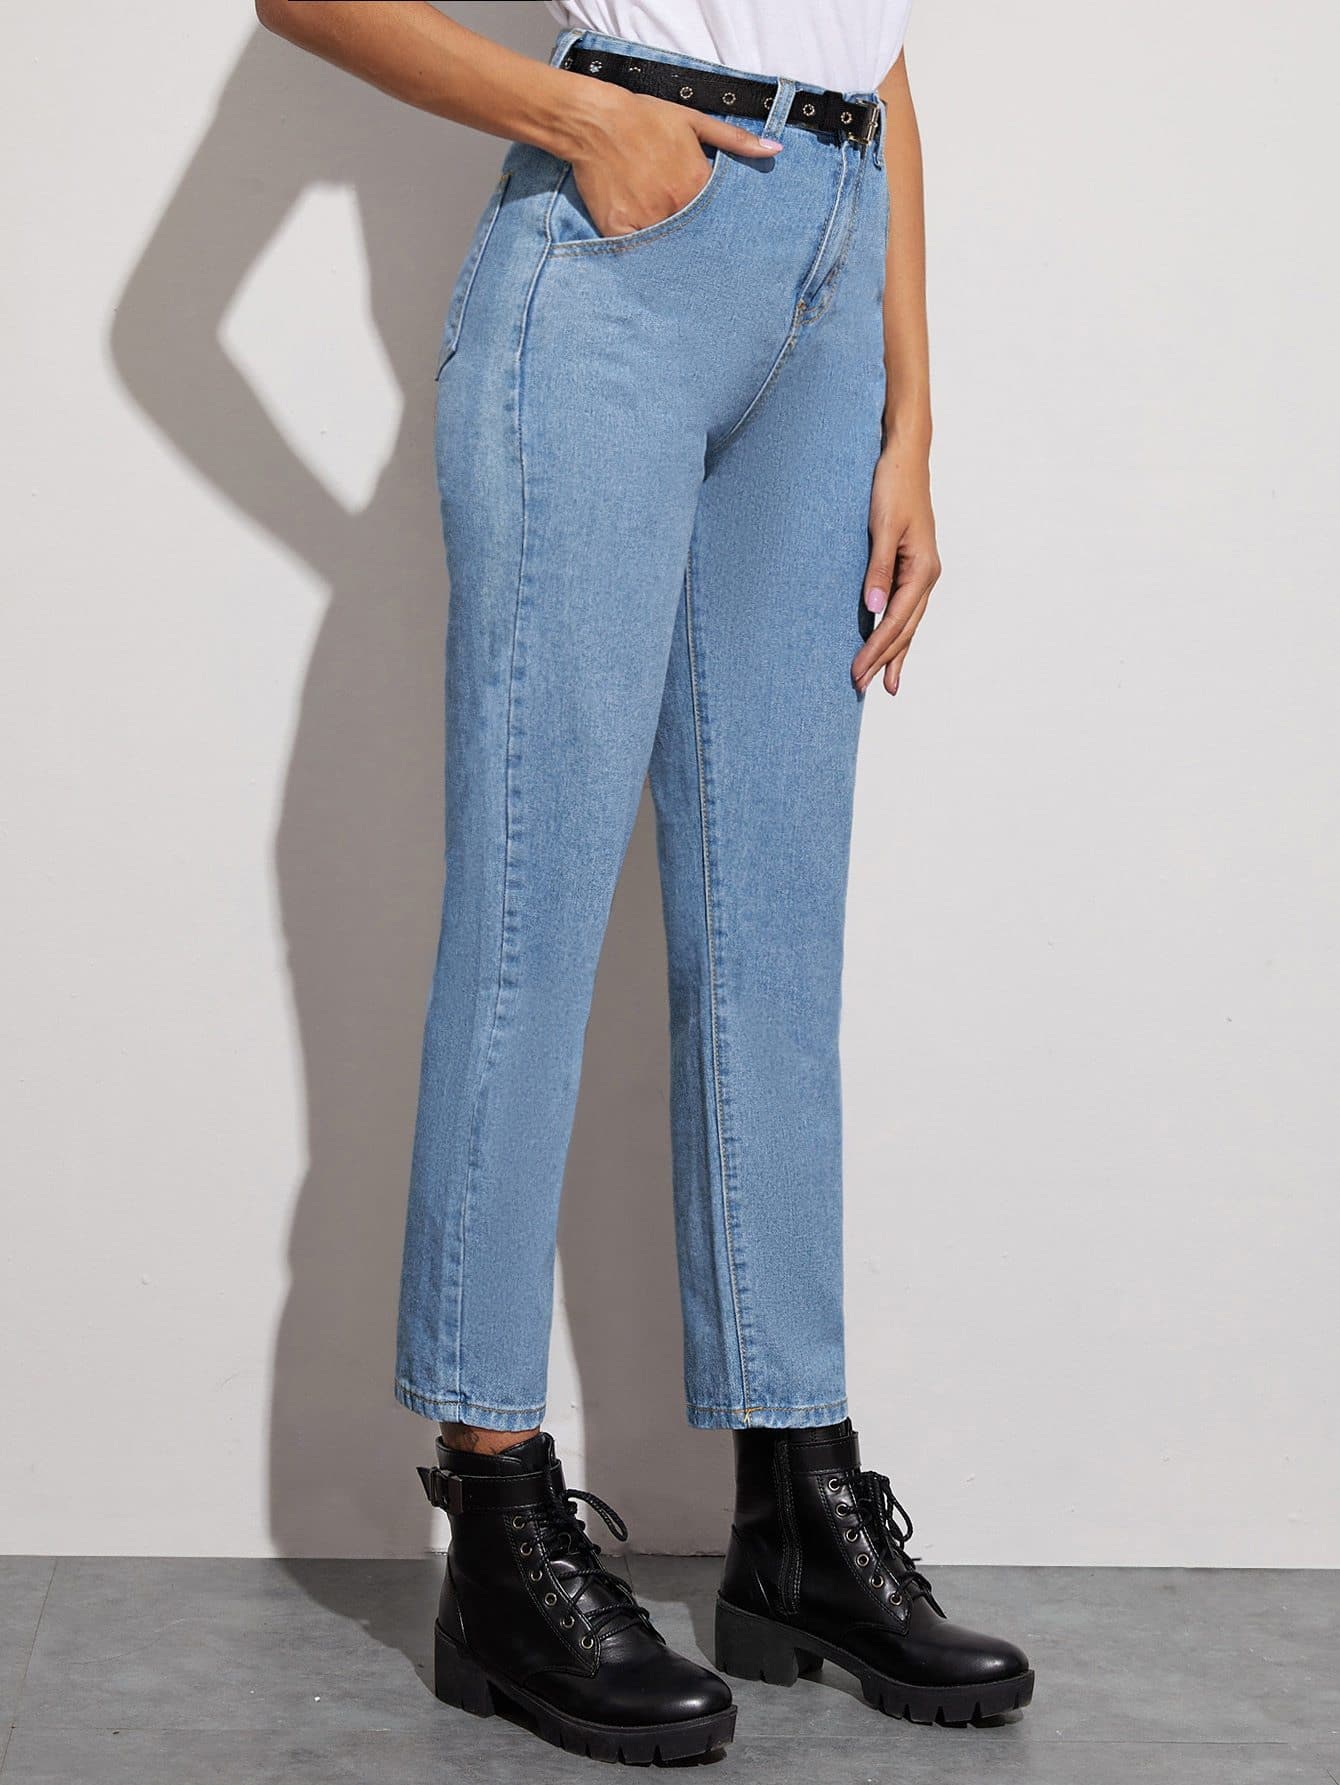 Blue Button Fly Solid Straight Jeans With Belt